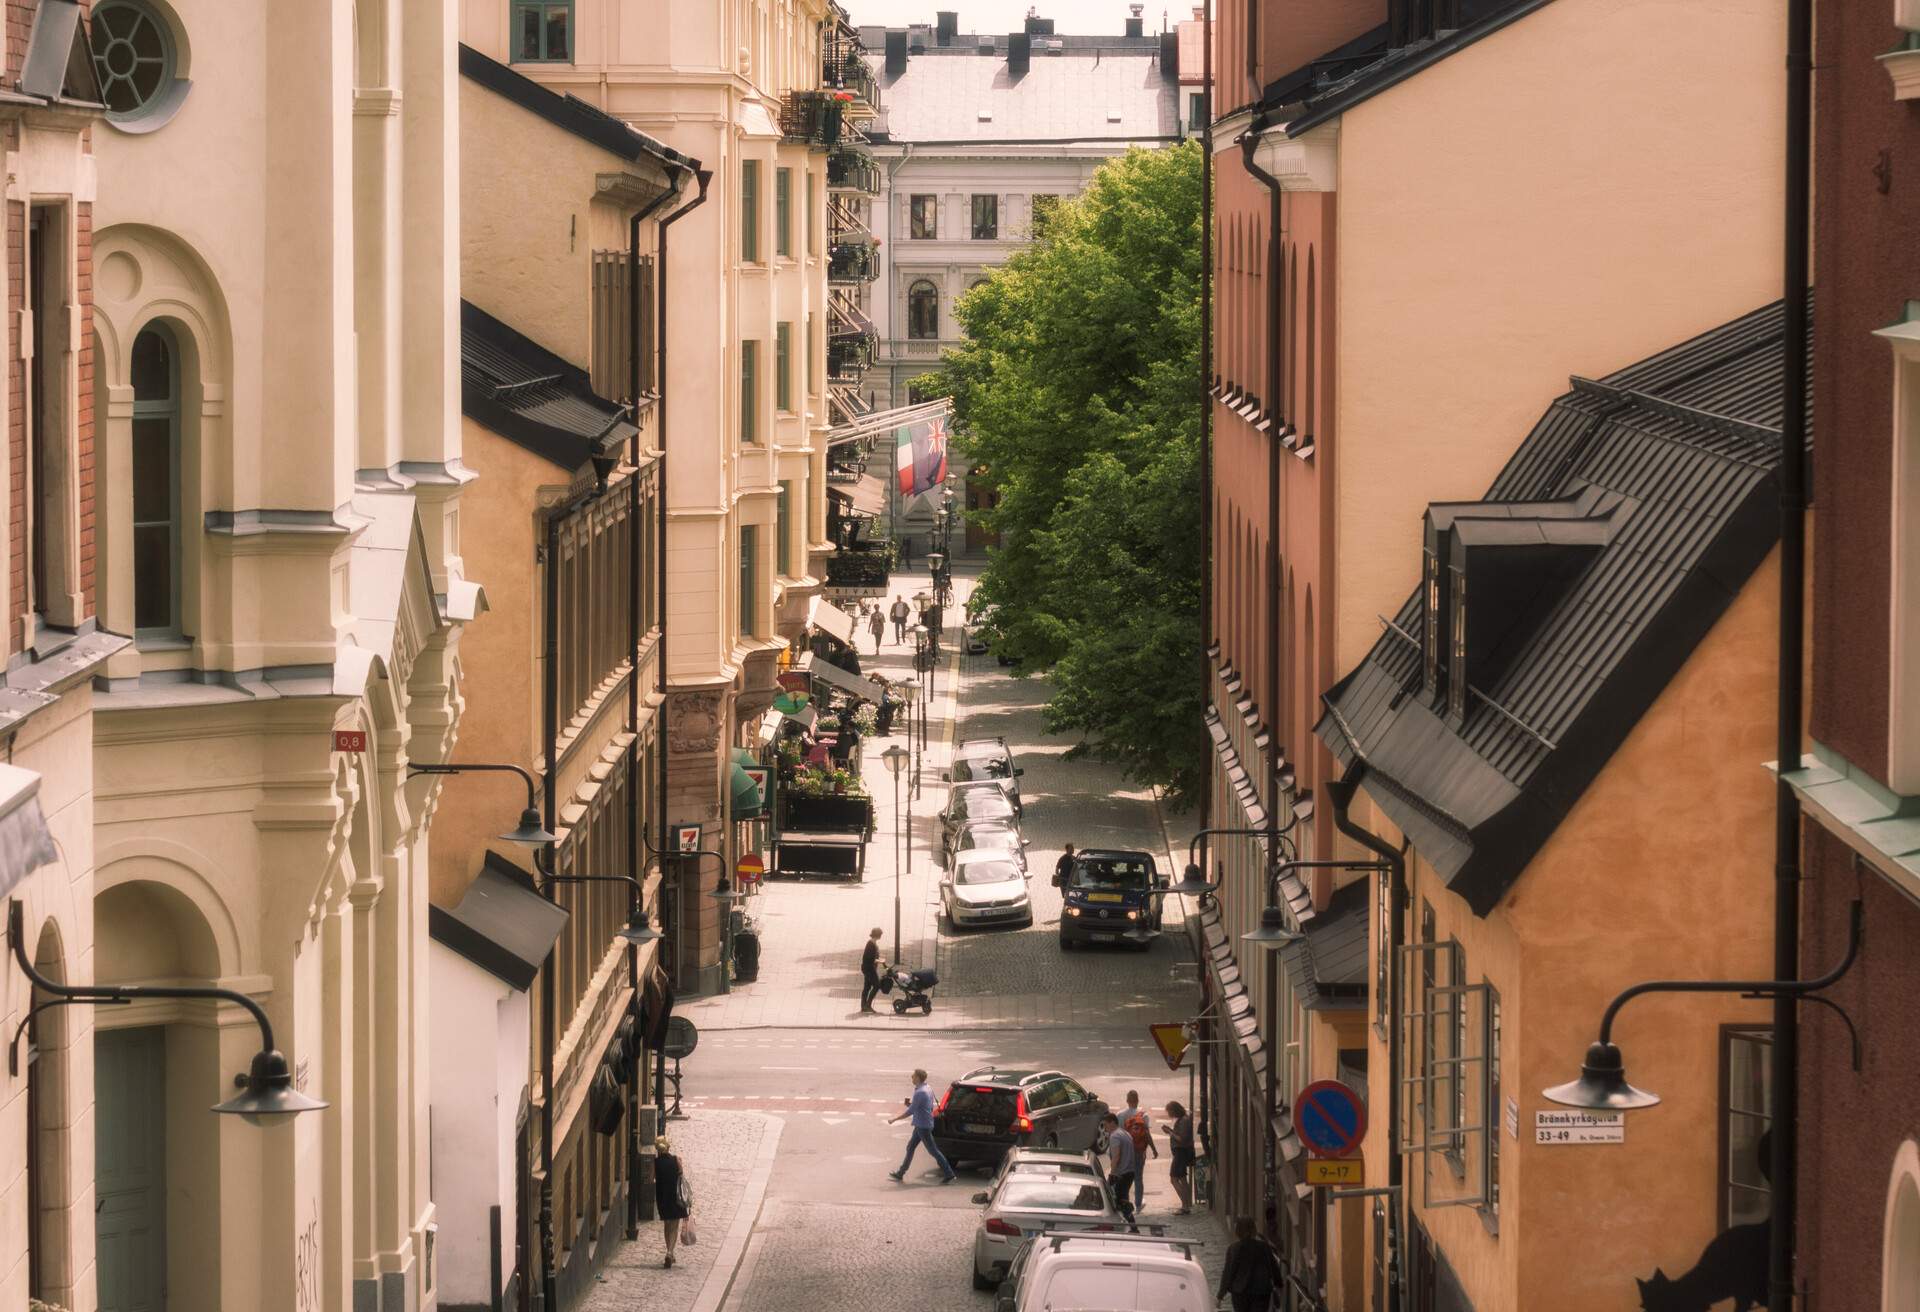 Södermalm is an island of Stockholm in Sweden, which forms the southern part of the city center.